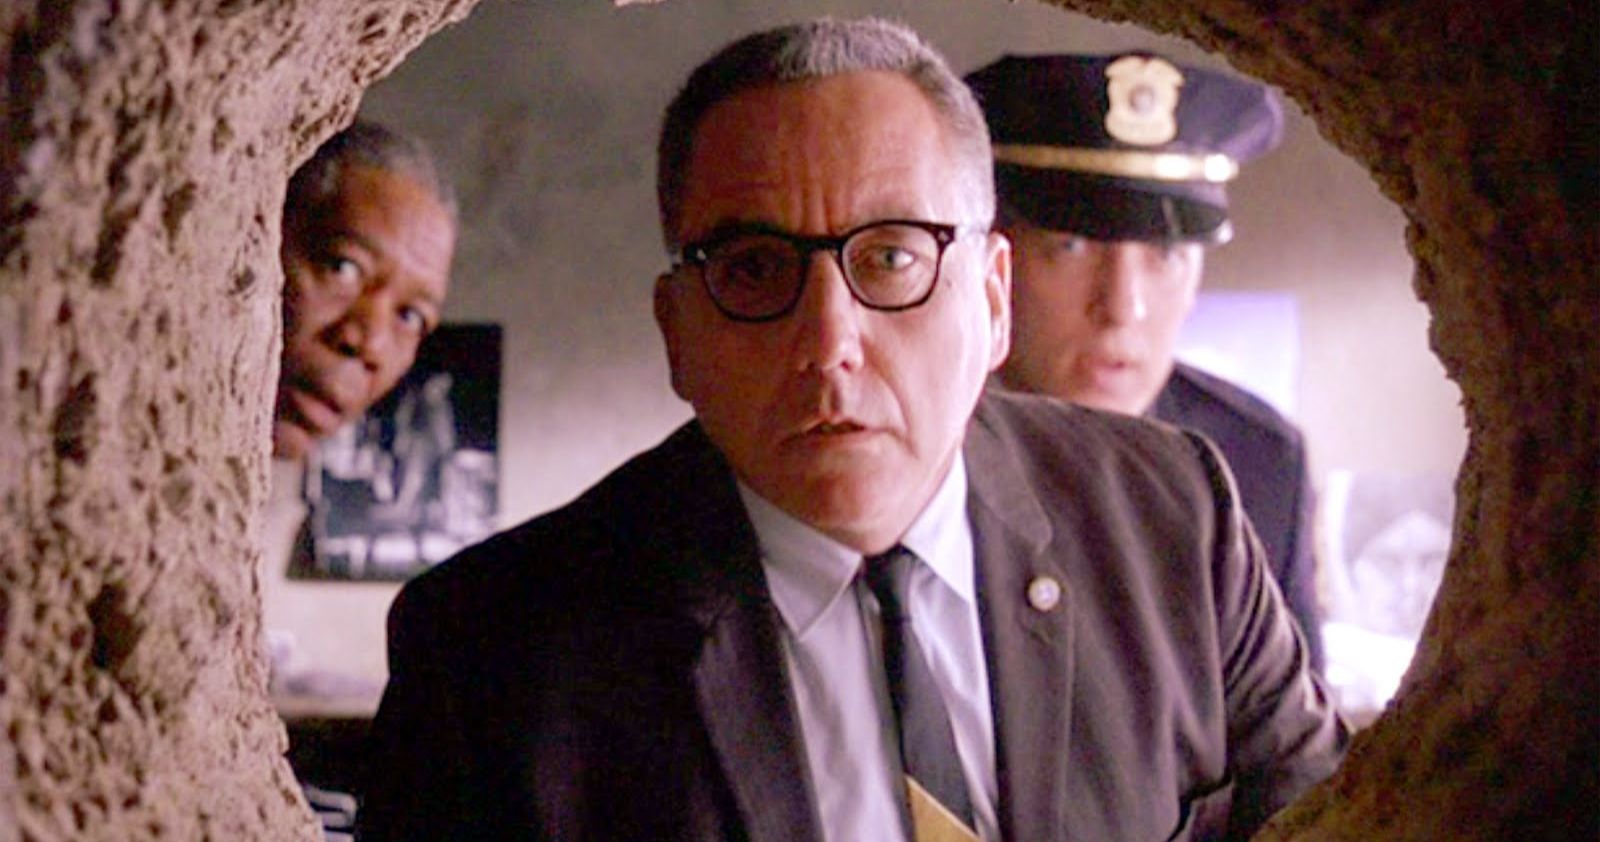 The Shawshank Redemption Returns to Theaters for 25th Anniversary in September